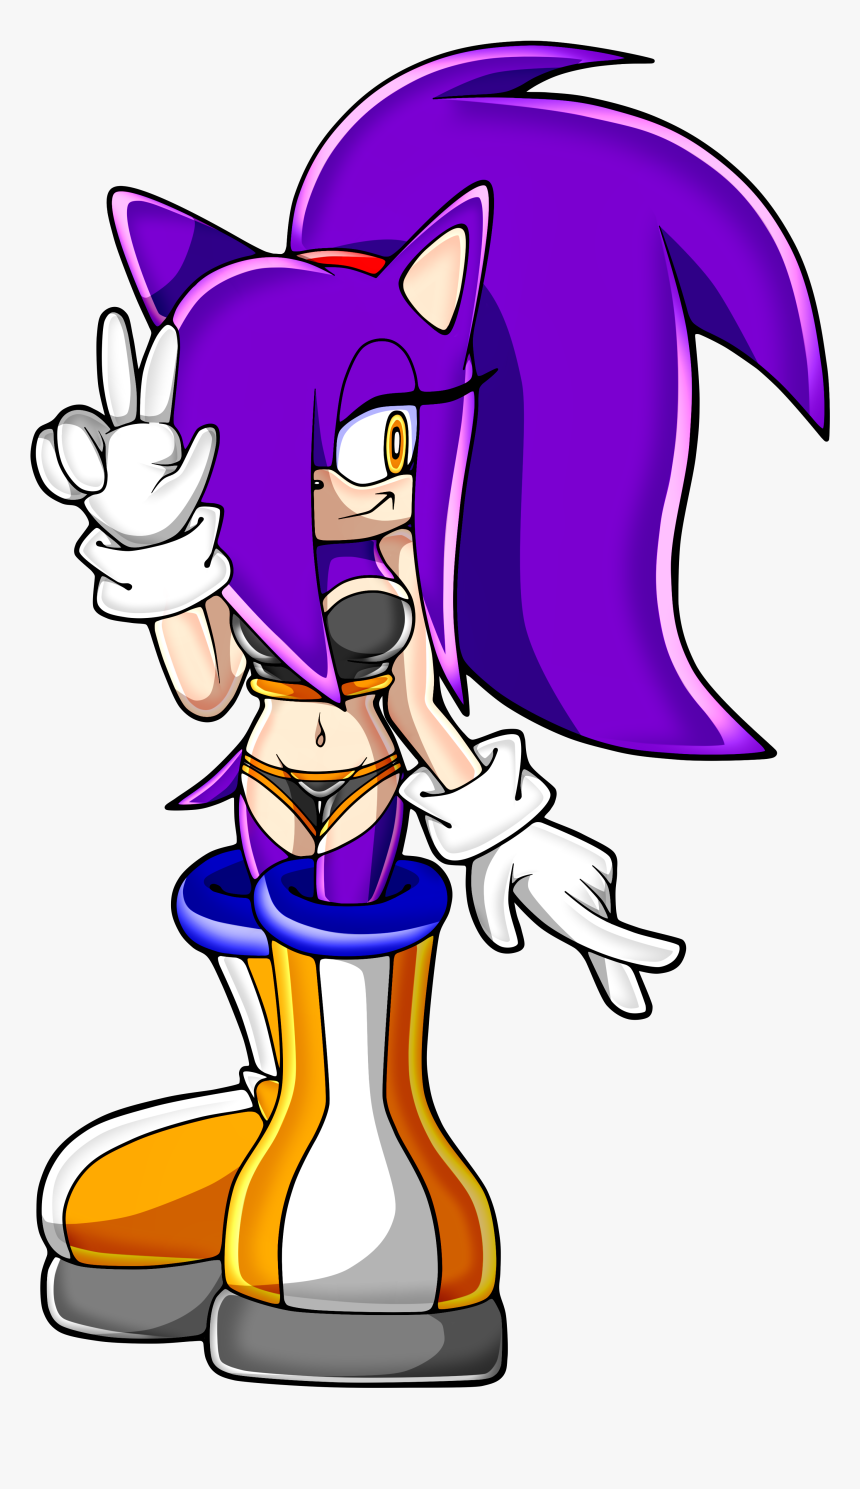 Natacha The Hedgehog - Female Sonic Characters Purple Hedgehogs, HD Png Download, Free Download